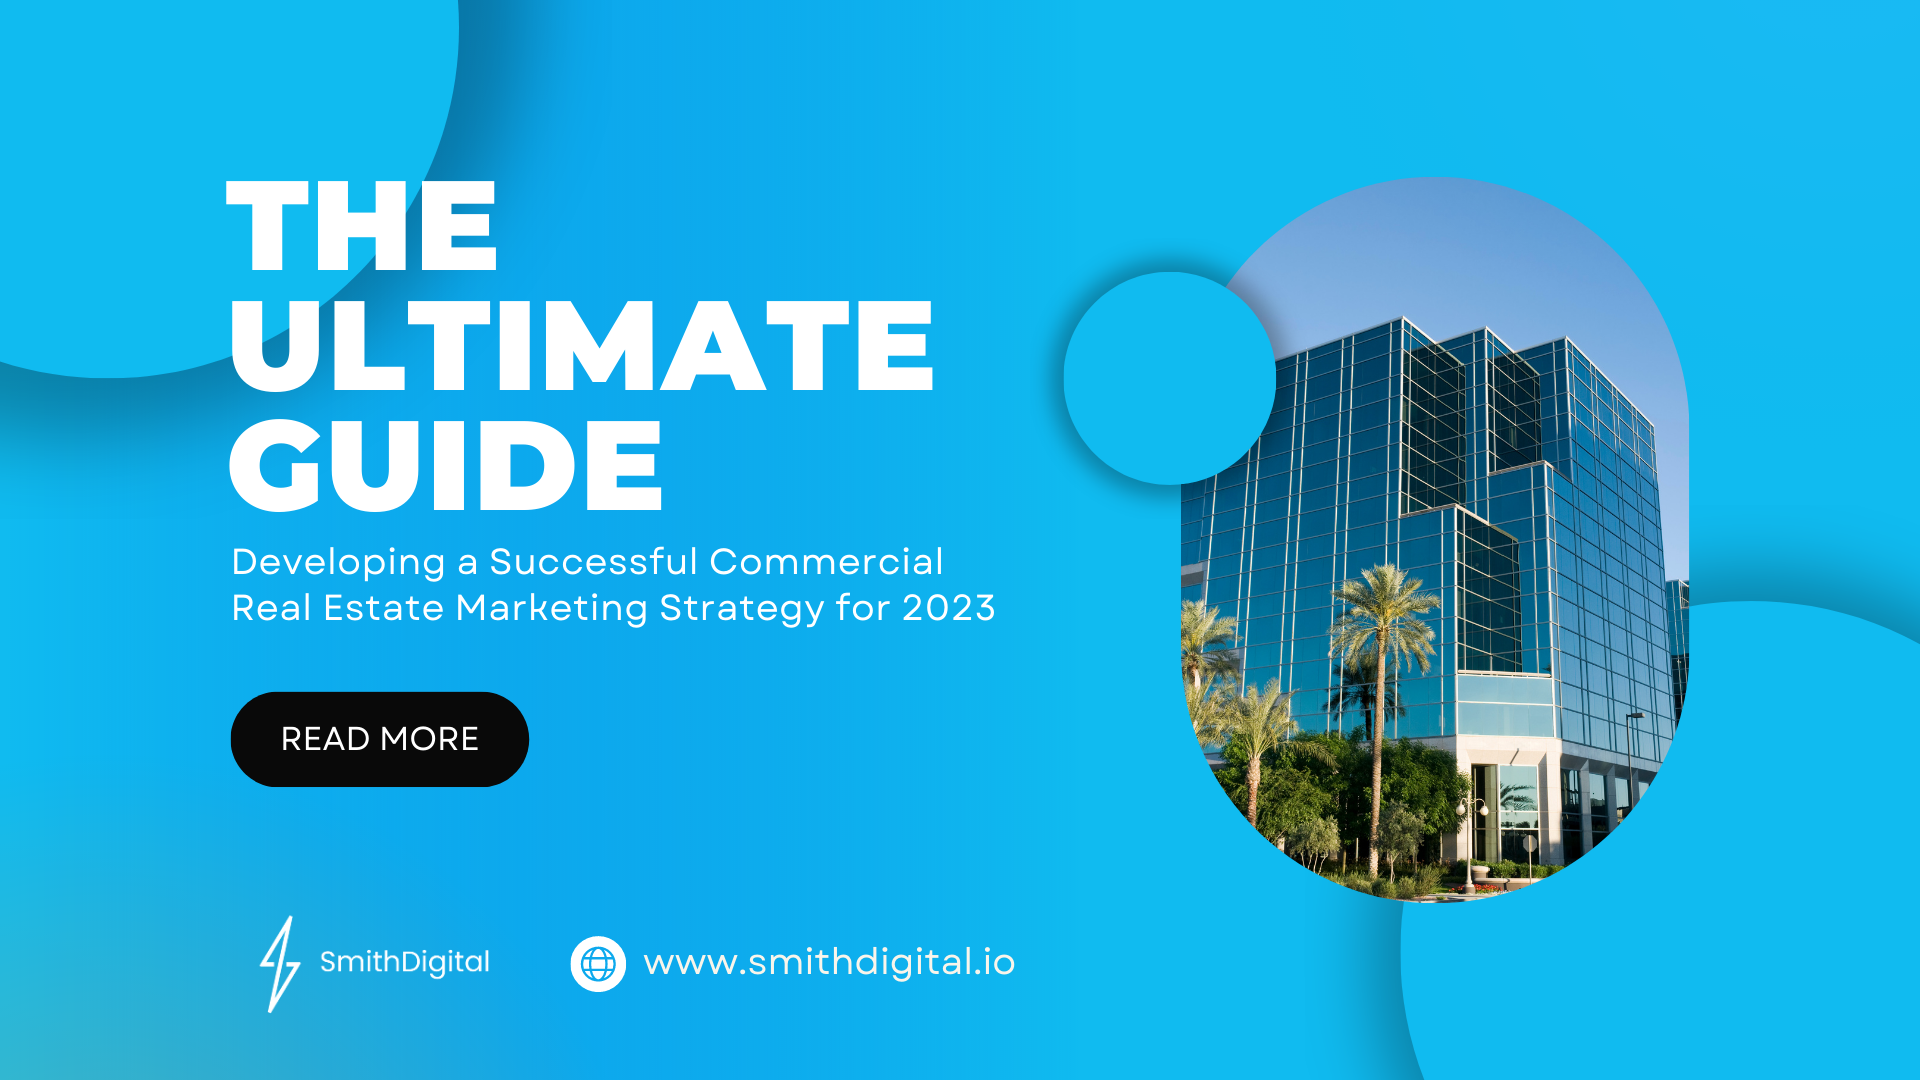 The Ultimate Guide to Developing a Successful Commercial Real Estate Marketing Strategy for 2023